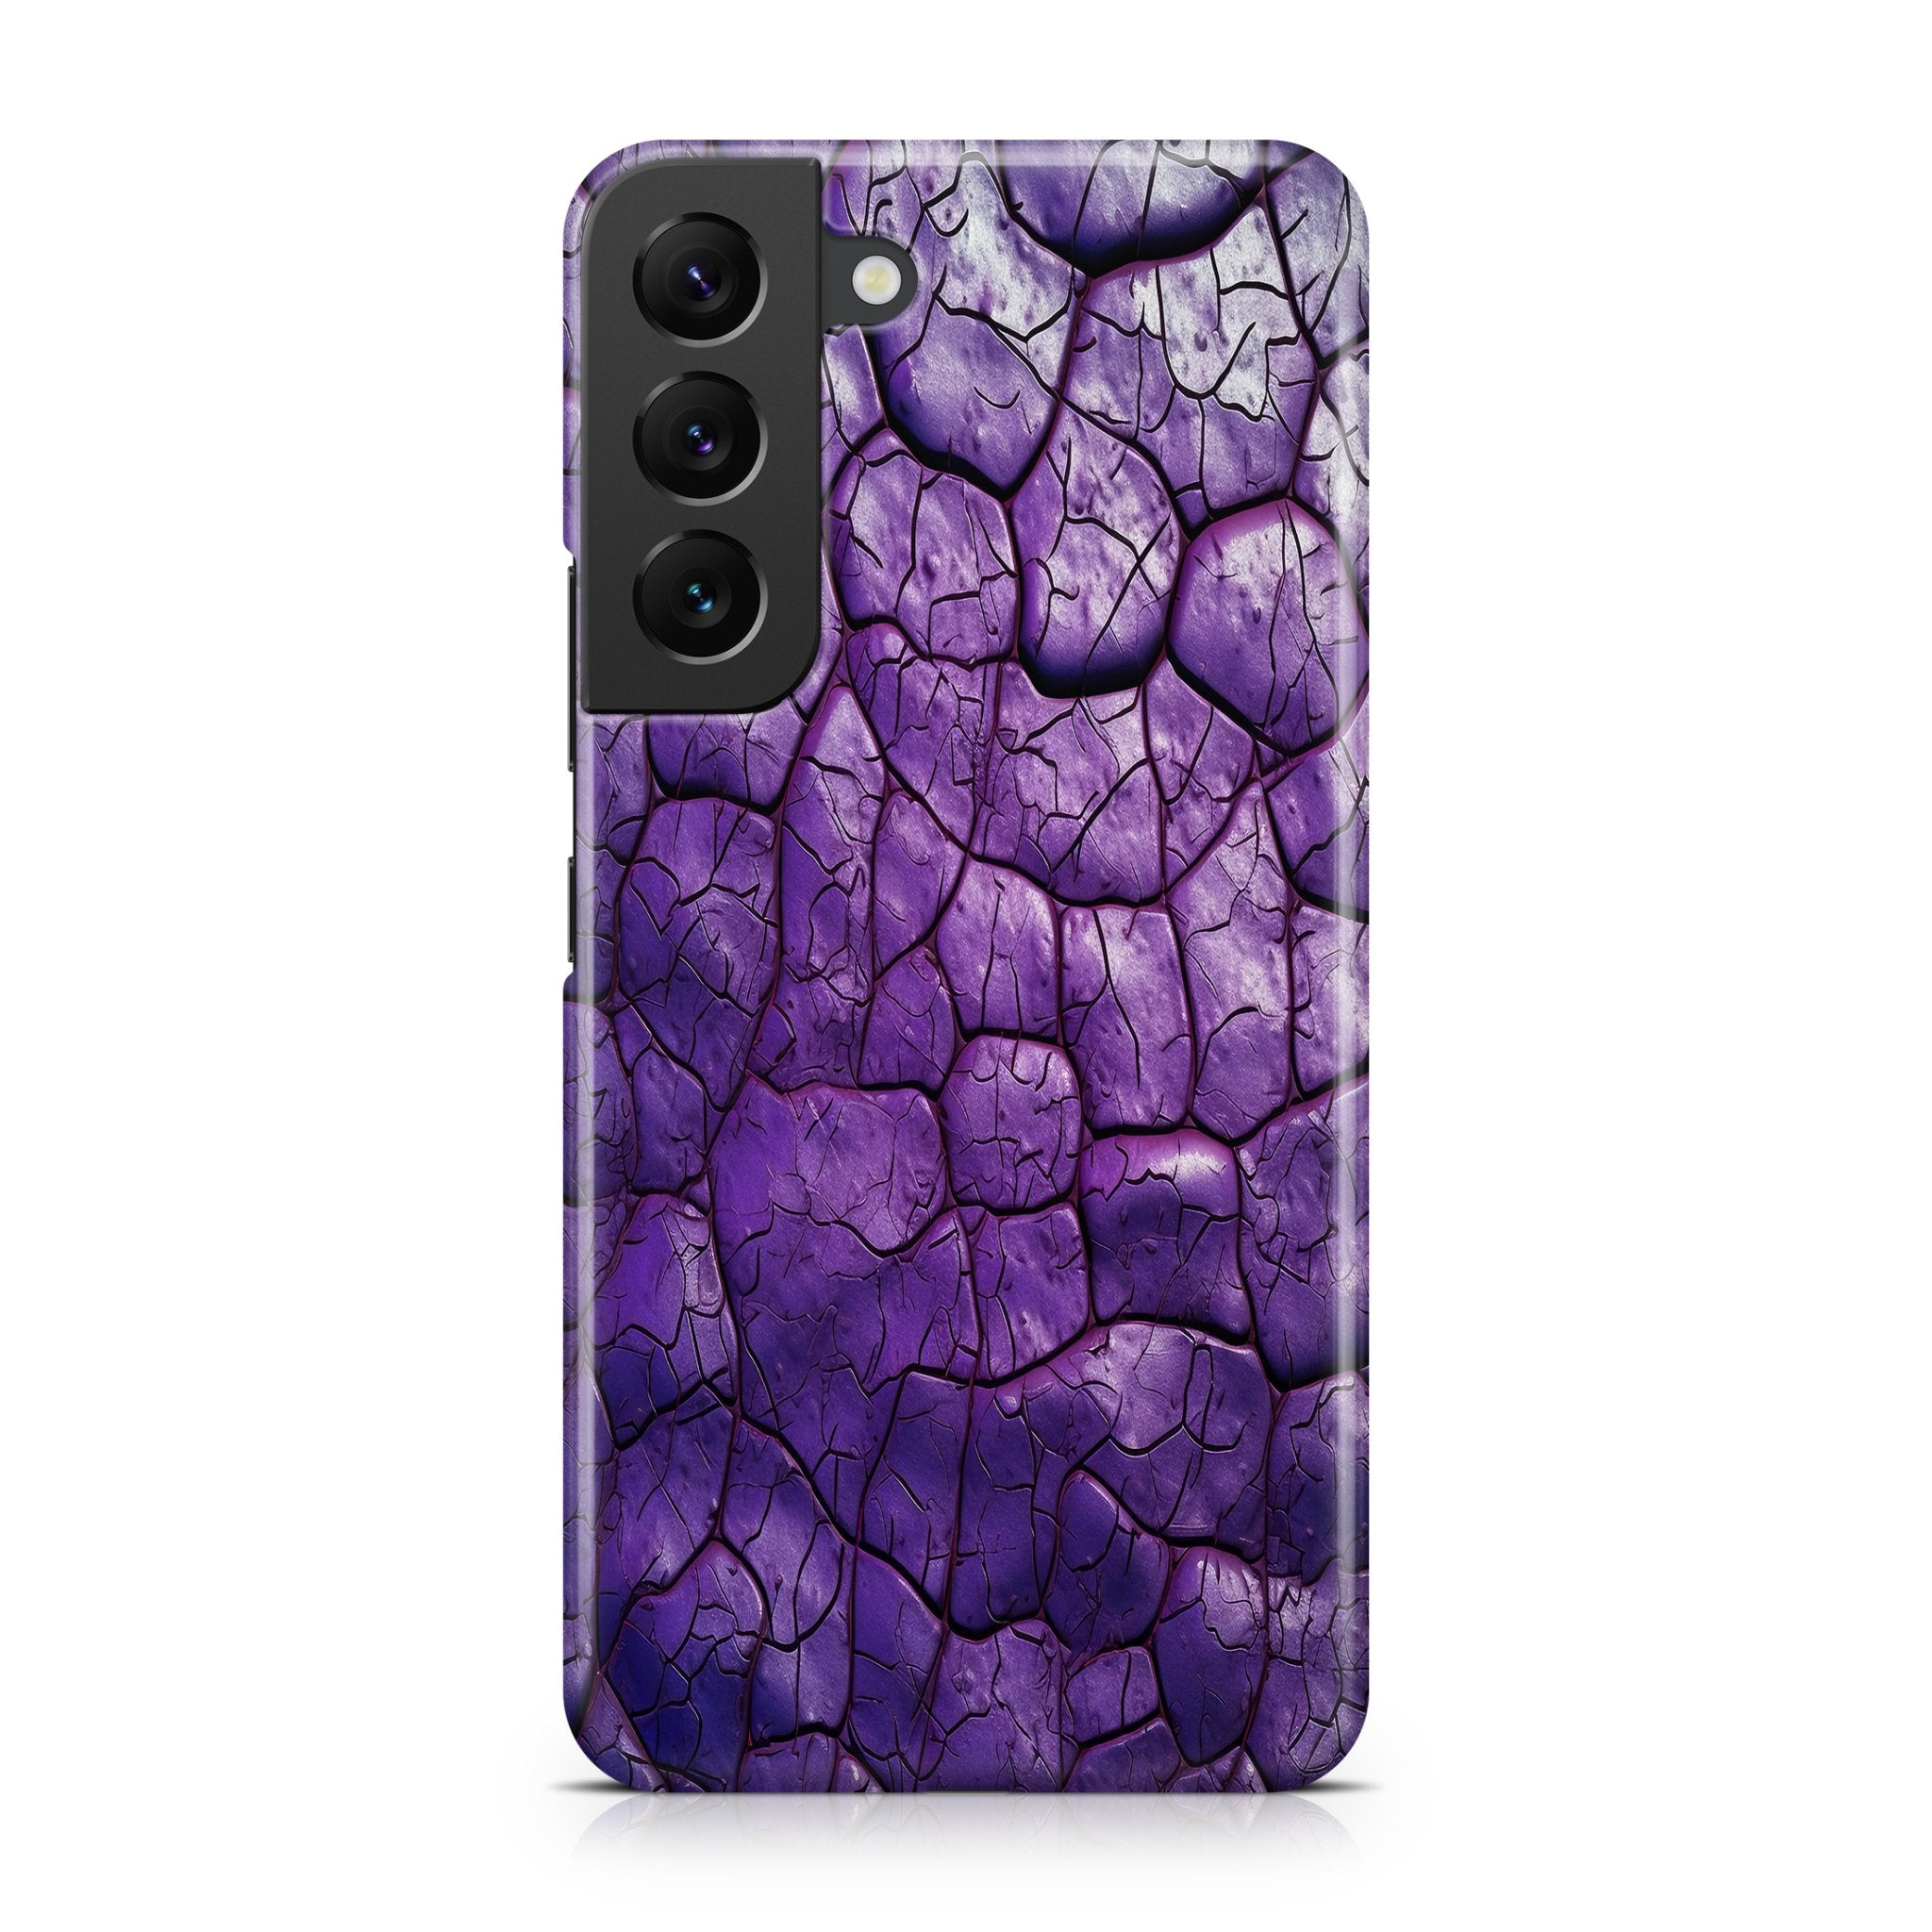 Purple Reptile Skin - Samsung phone case designs by CaseSwagger